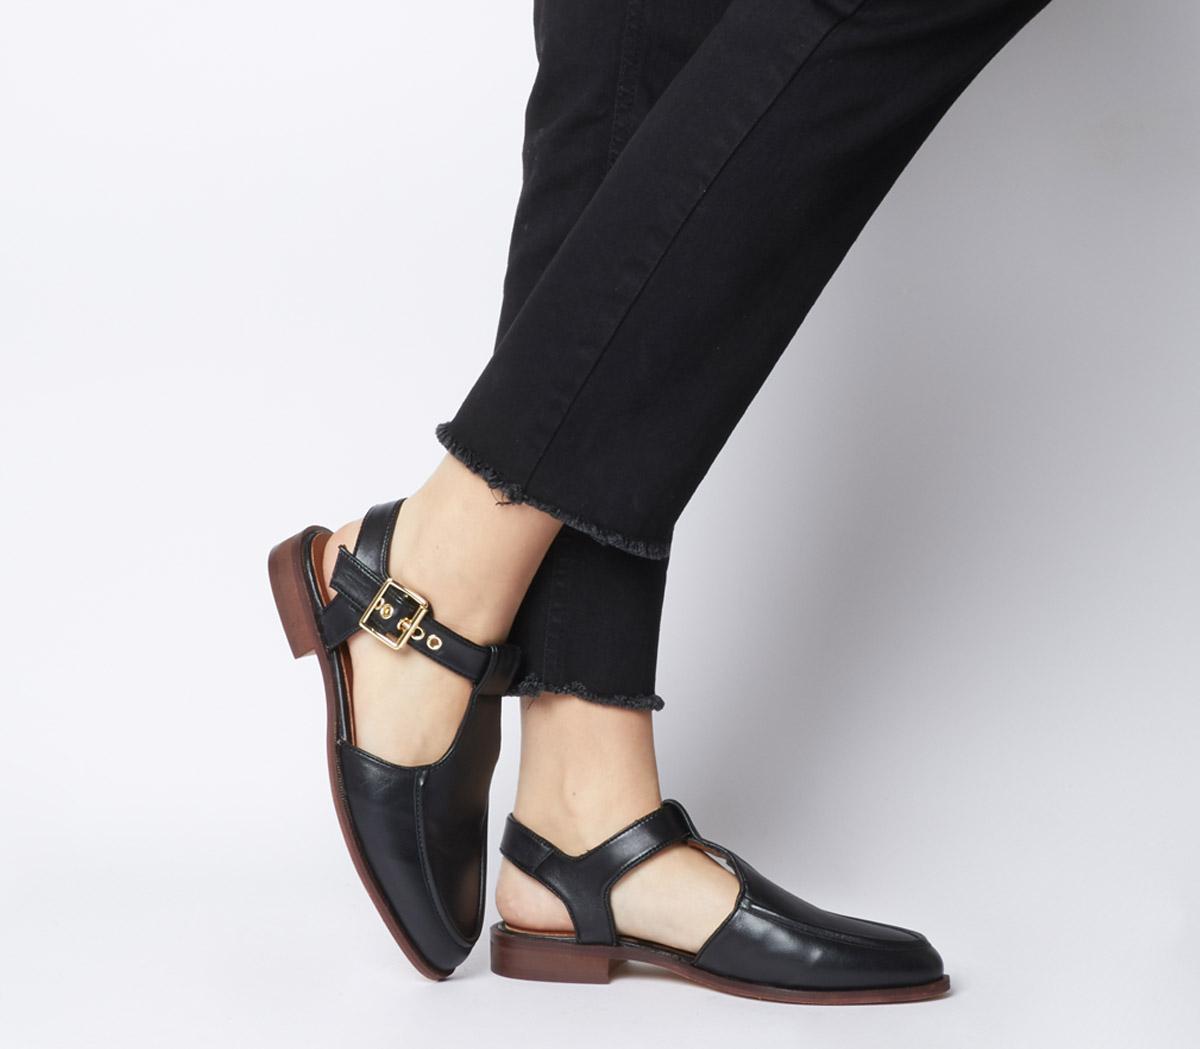 Office Filter Cut Out Flats Black Leather - Flat Shoes for Women